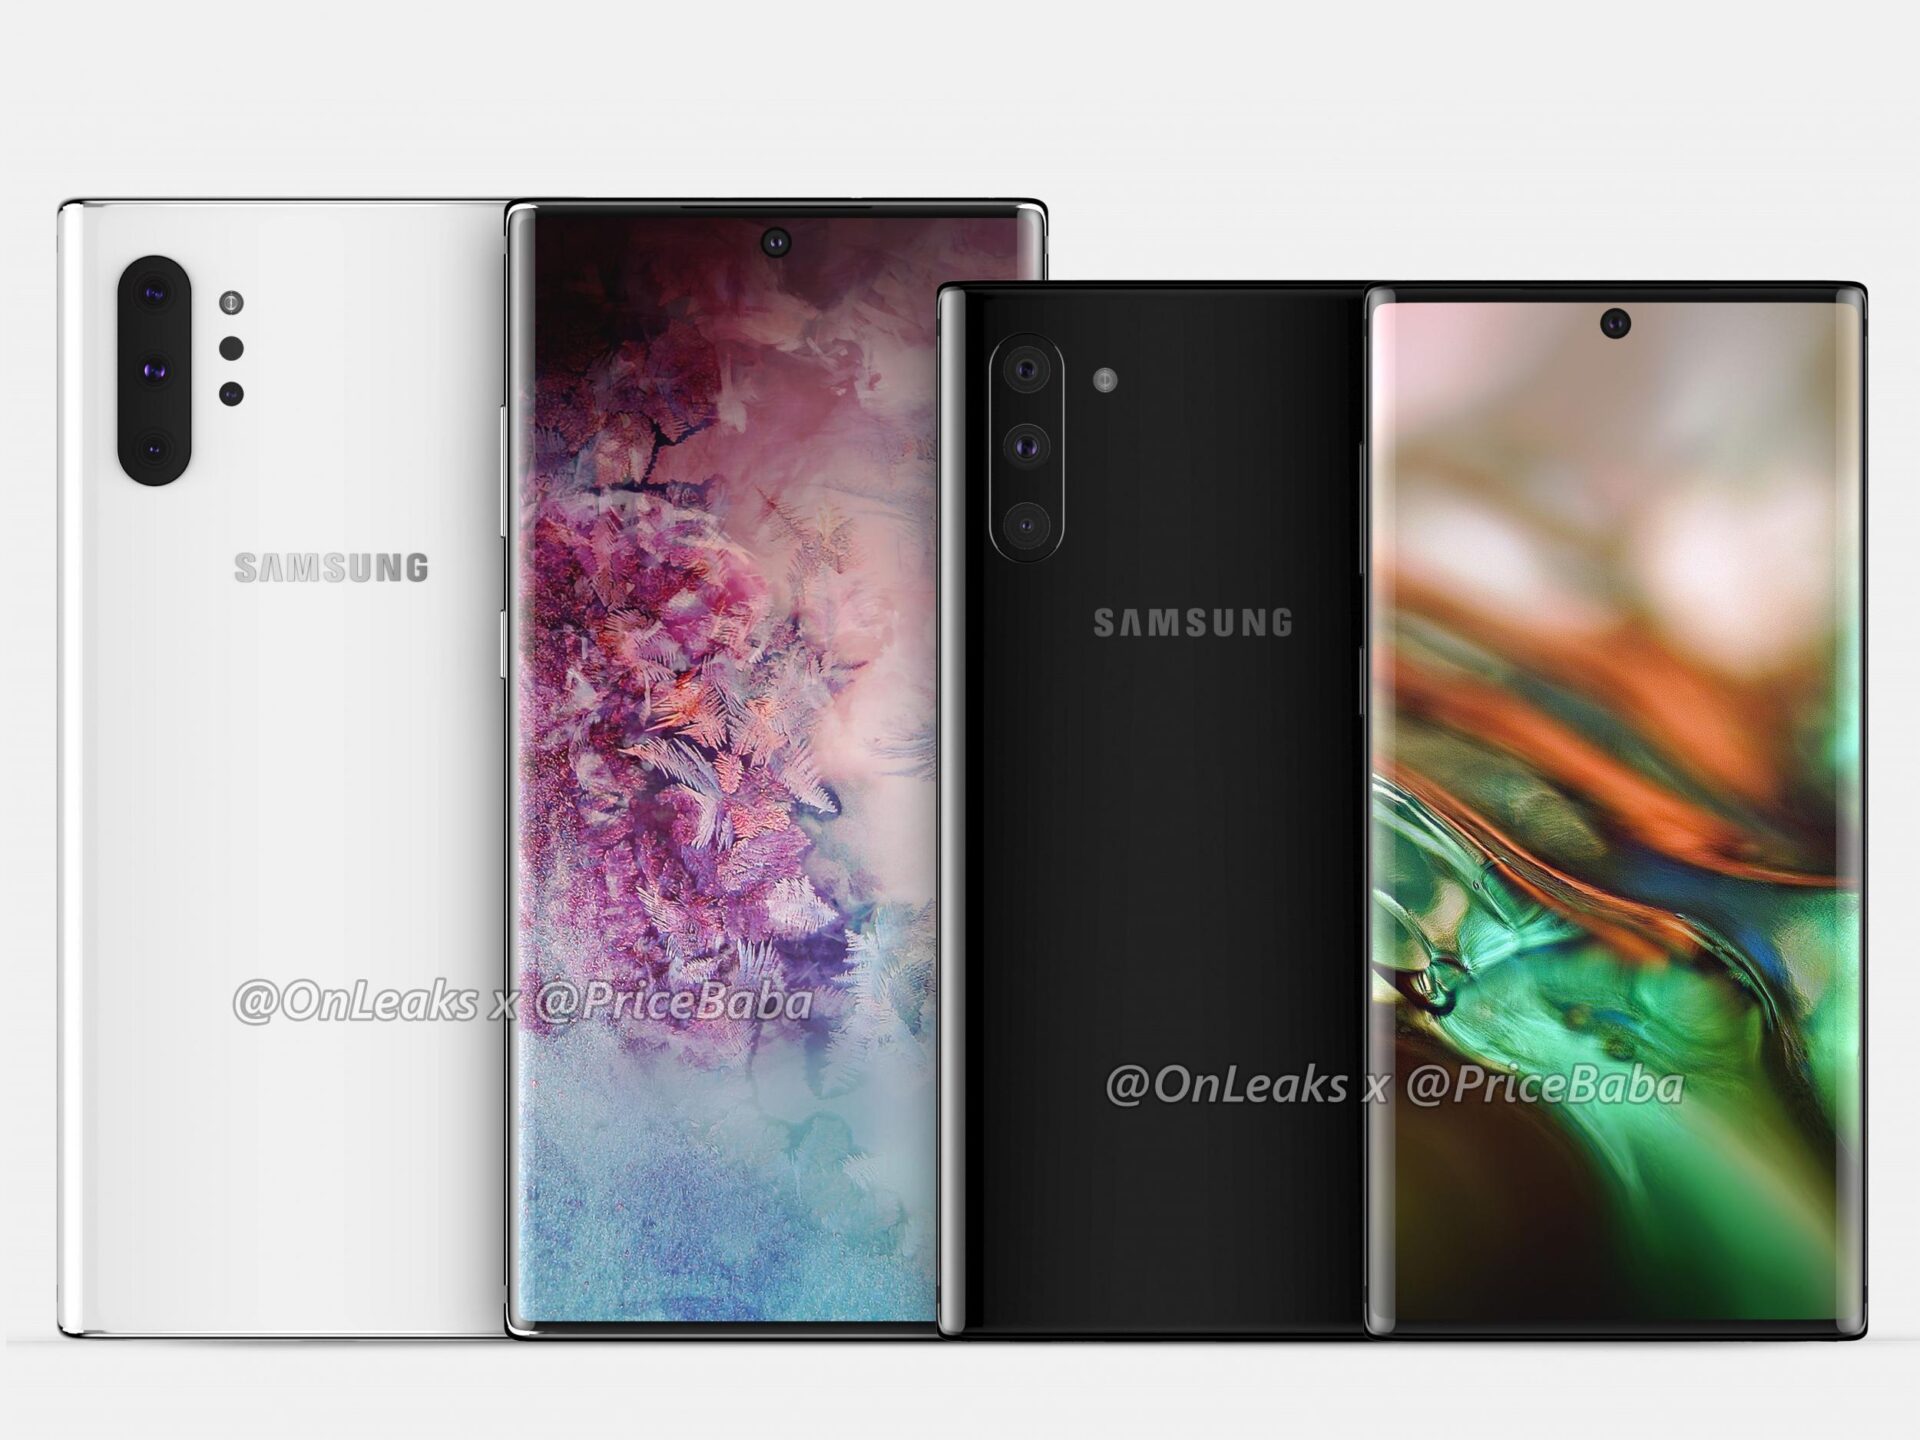 Samsung to hold 'Unpacked 2019' launch event for Galaxy Note 10 series on Aug 7